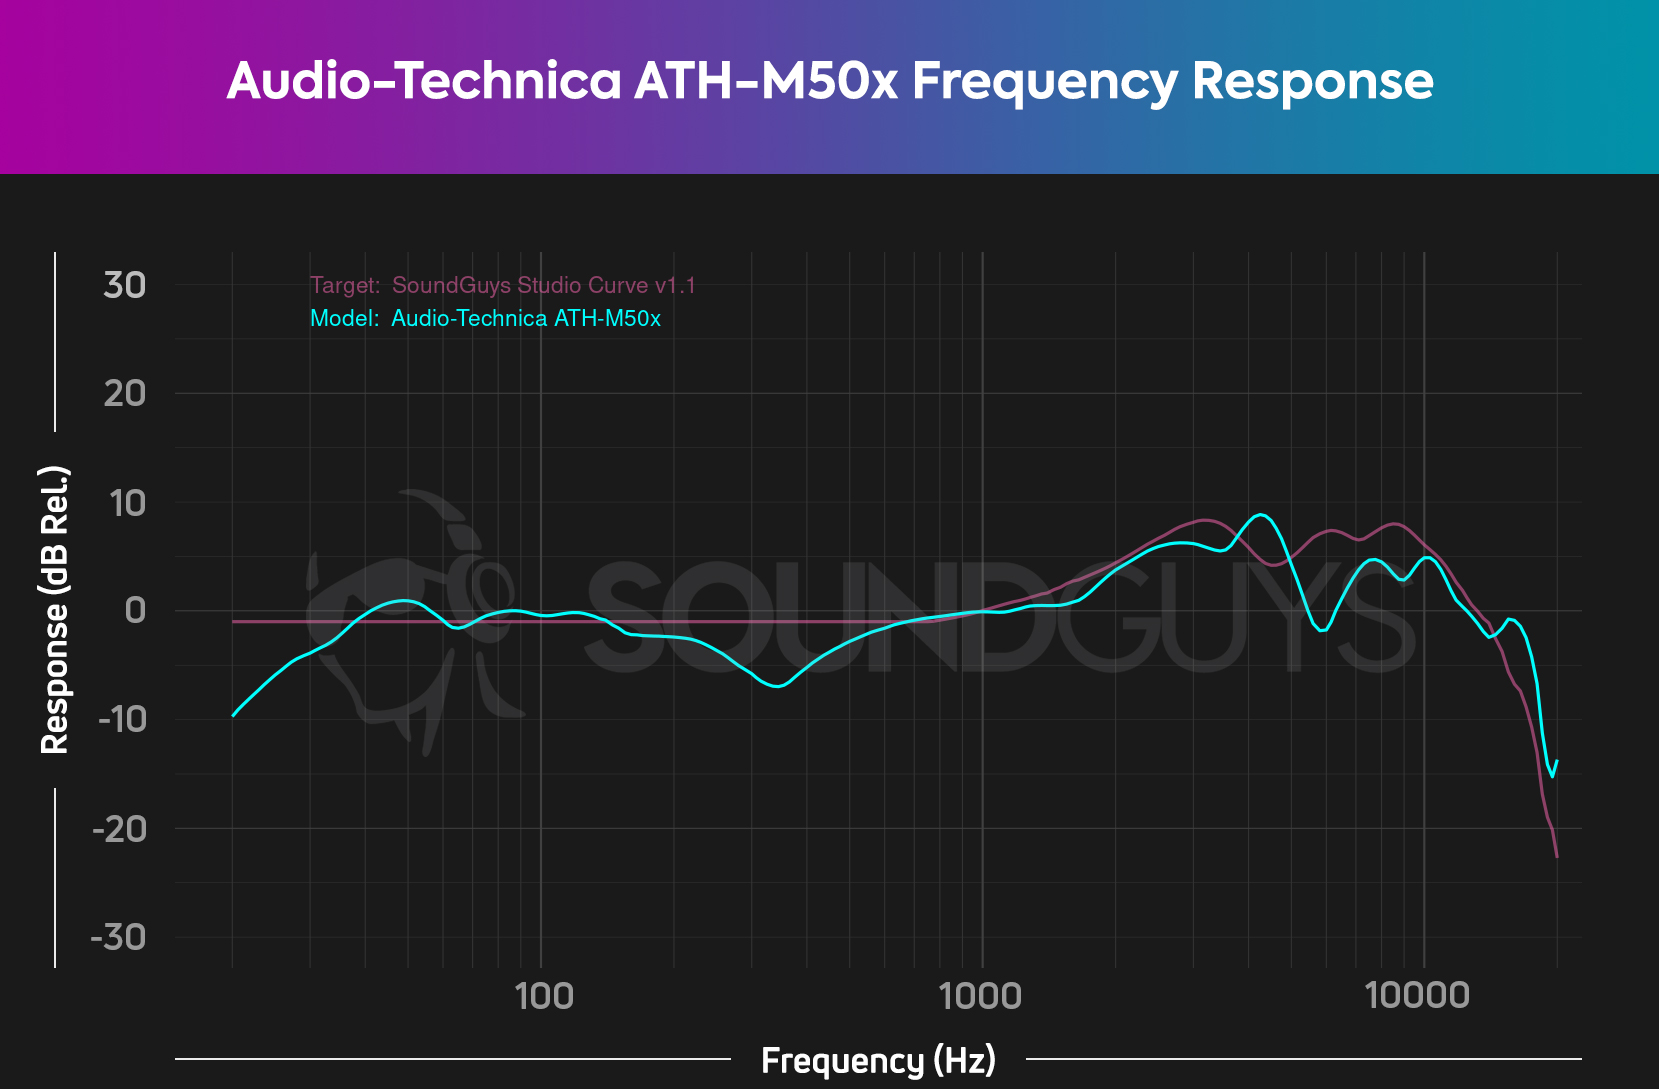 A chart depicts the Audio-Technica ATH-M50x frequency response against the SoundGuys Studio Curve V1.11, showing the ATH-M50x has a fairly good response with acceptable deviation in the sub-bass and midrange from our studio curve.